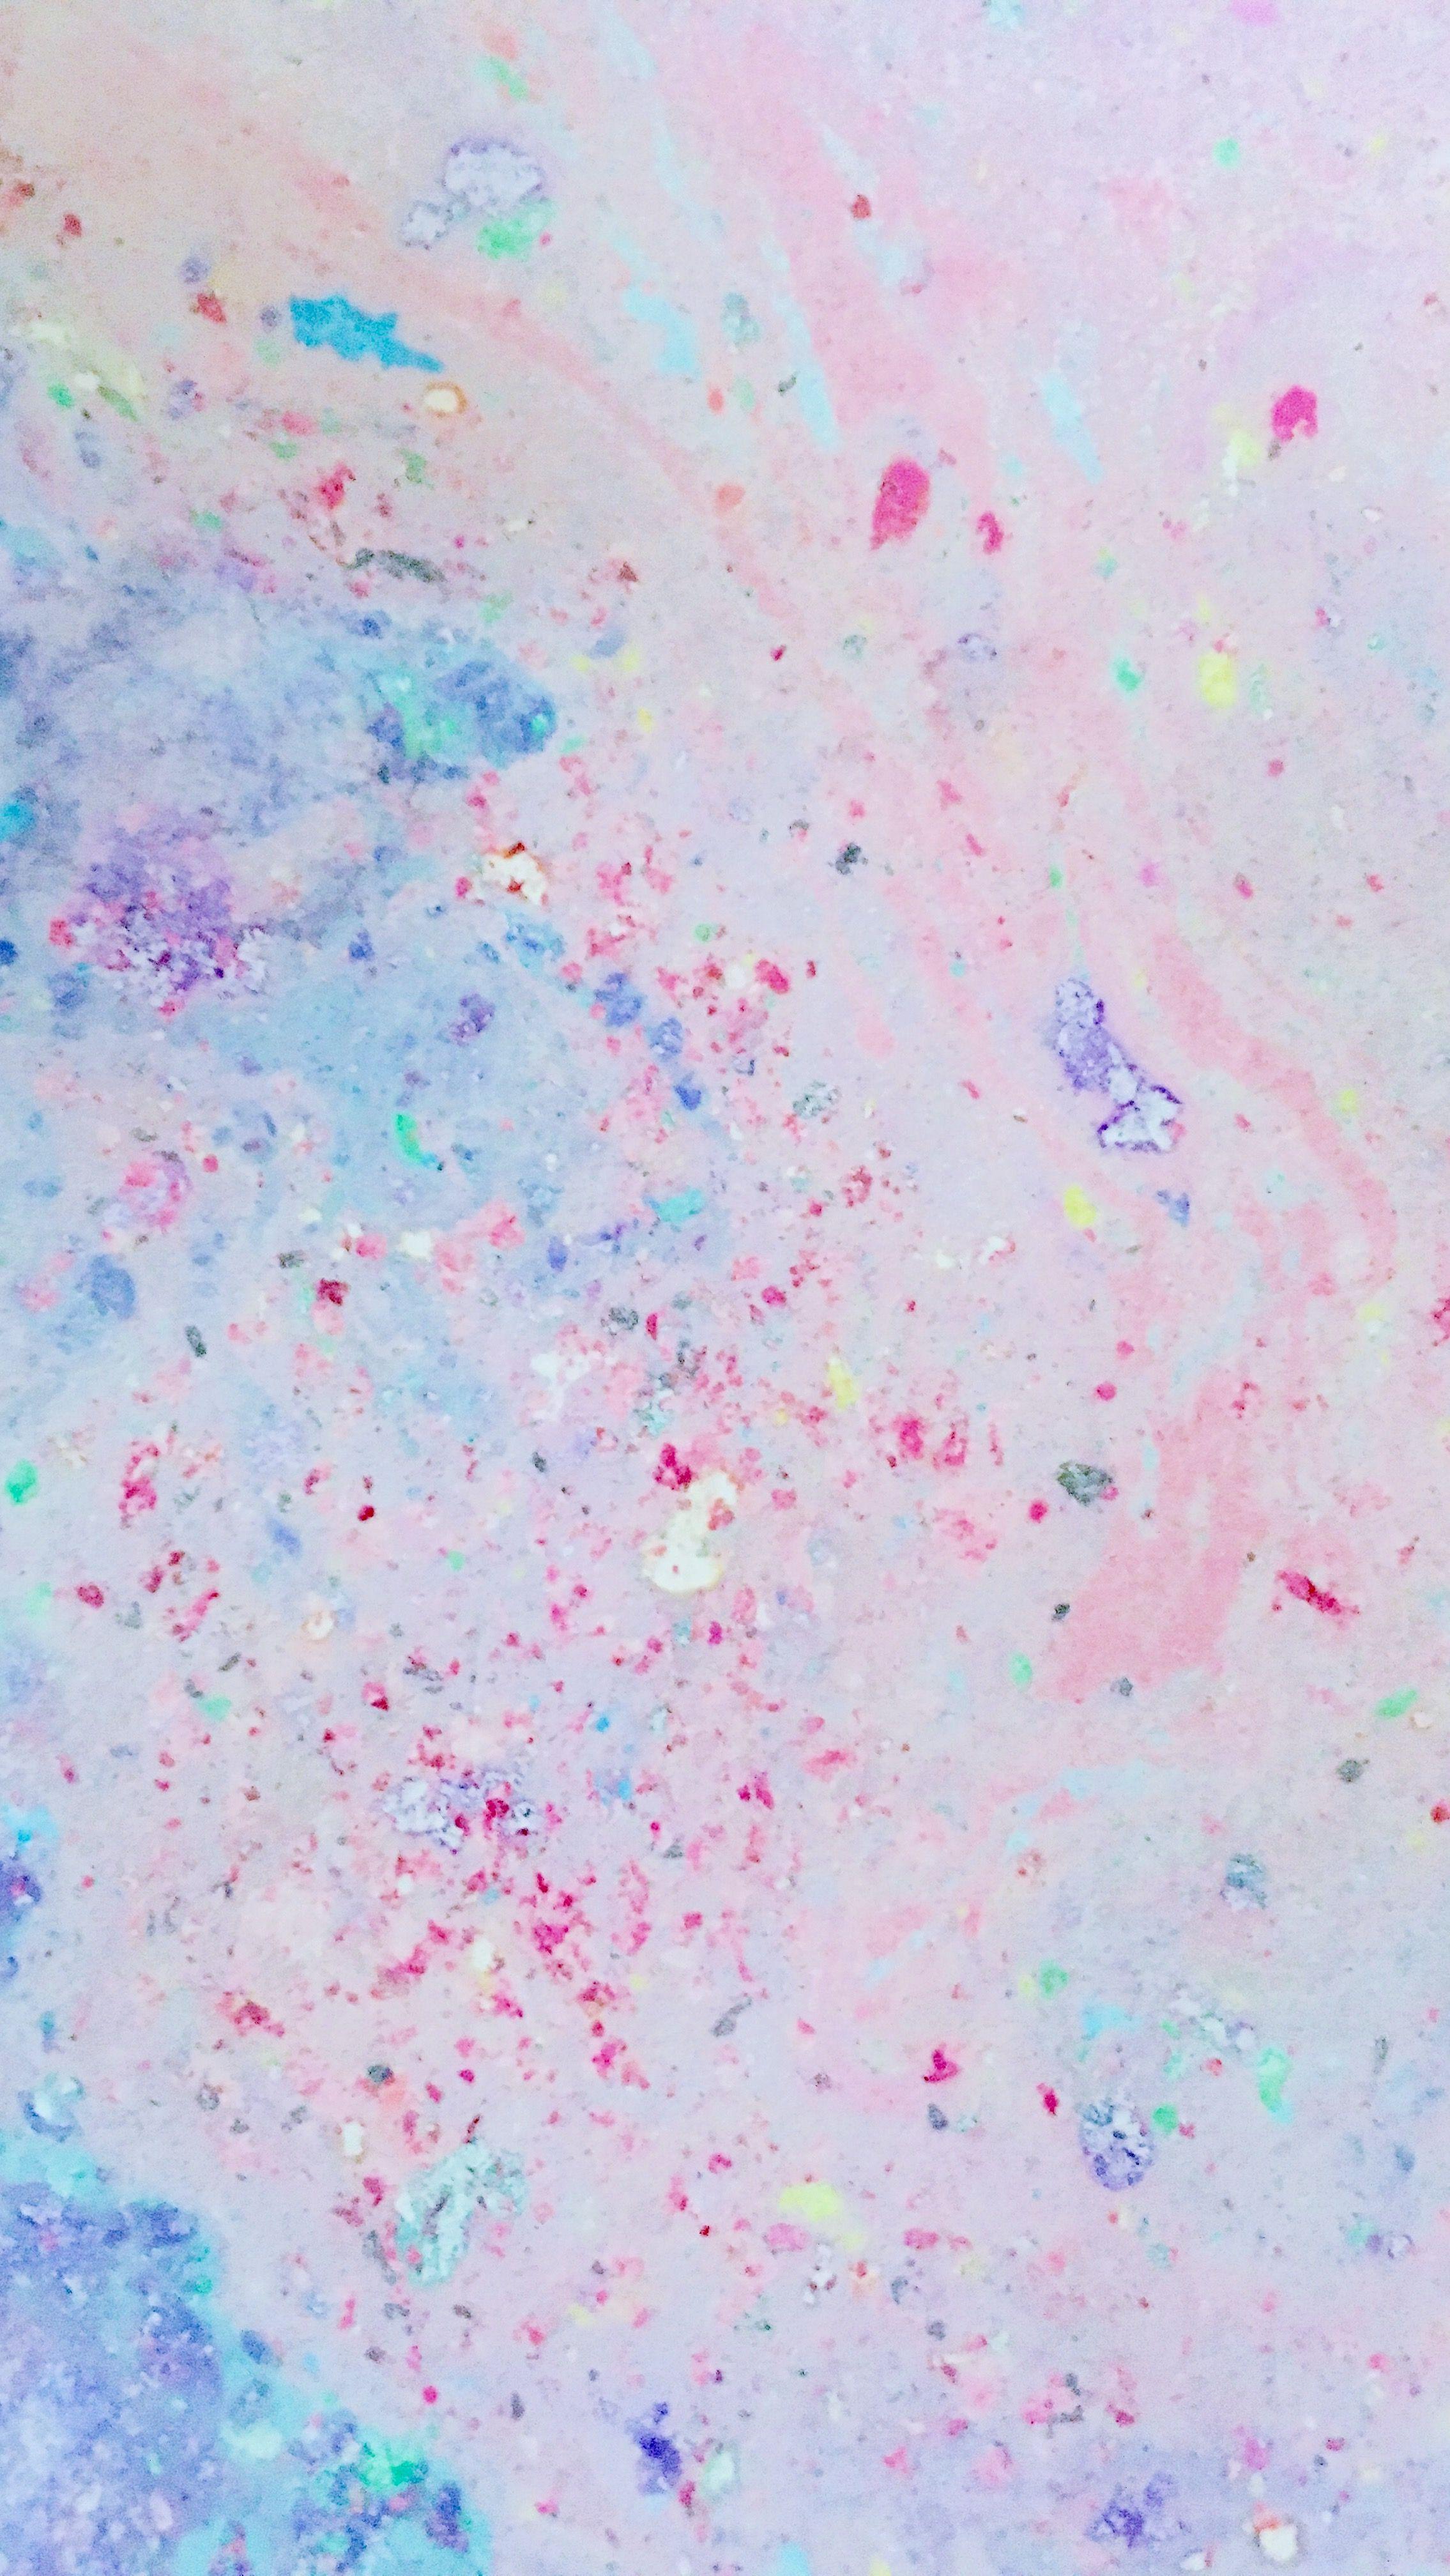 A photo of a piece of paper with pastel colors and glitter on it - Pastel